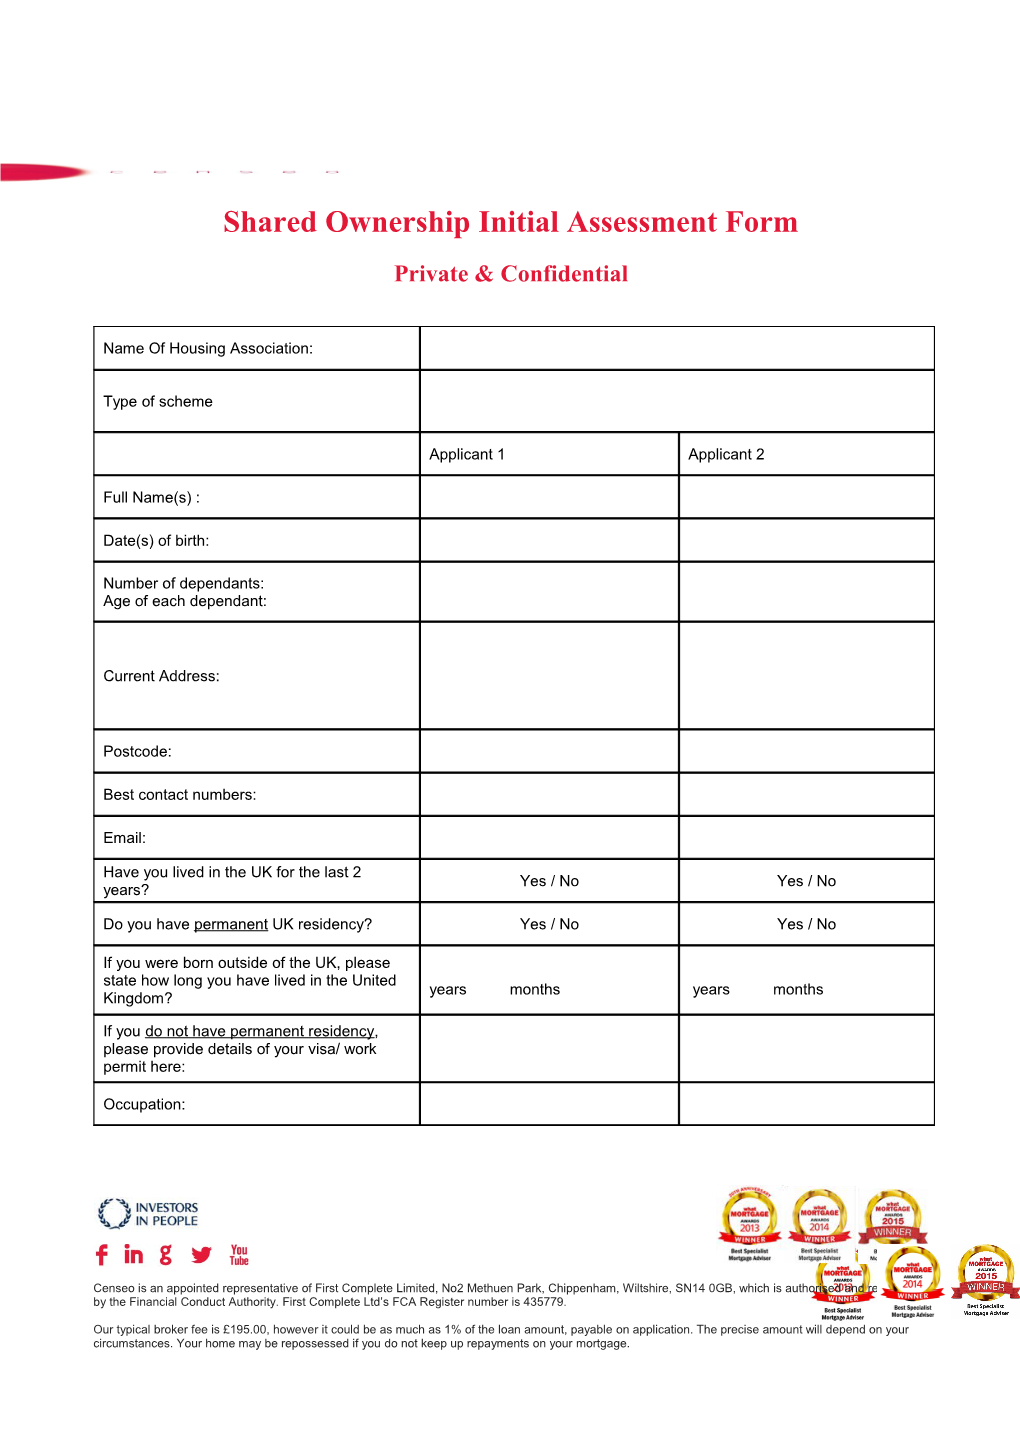 Shared Ownership Initial Assessment Form